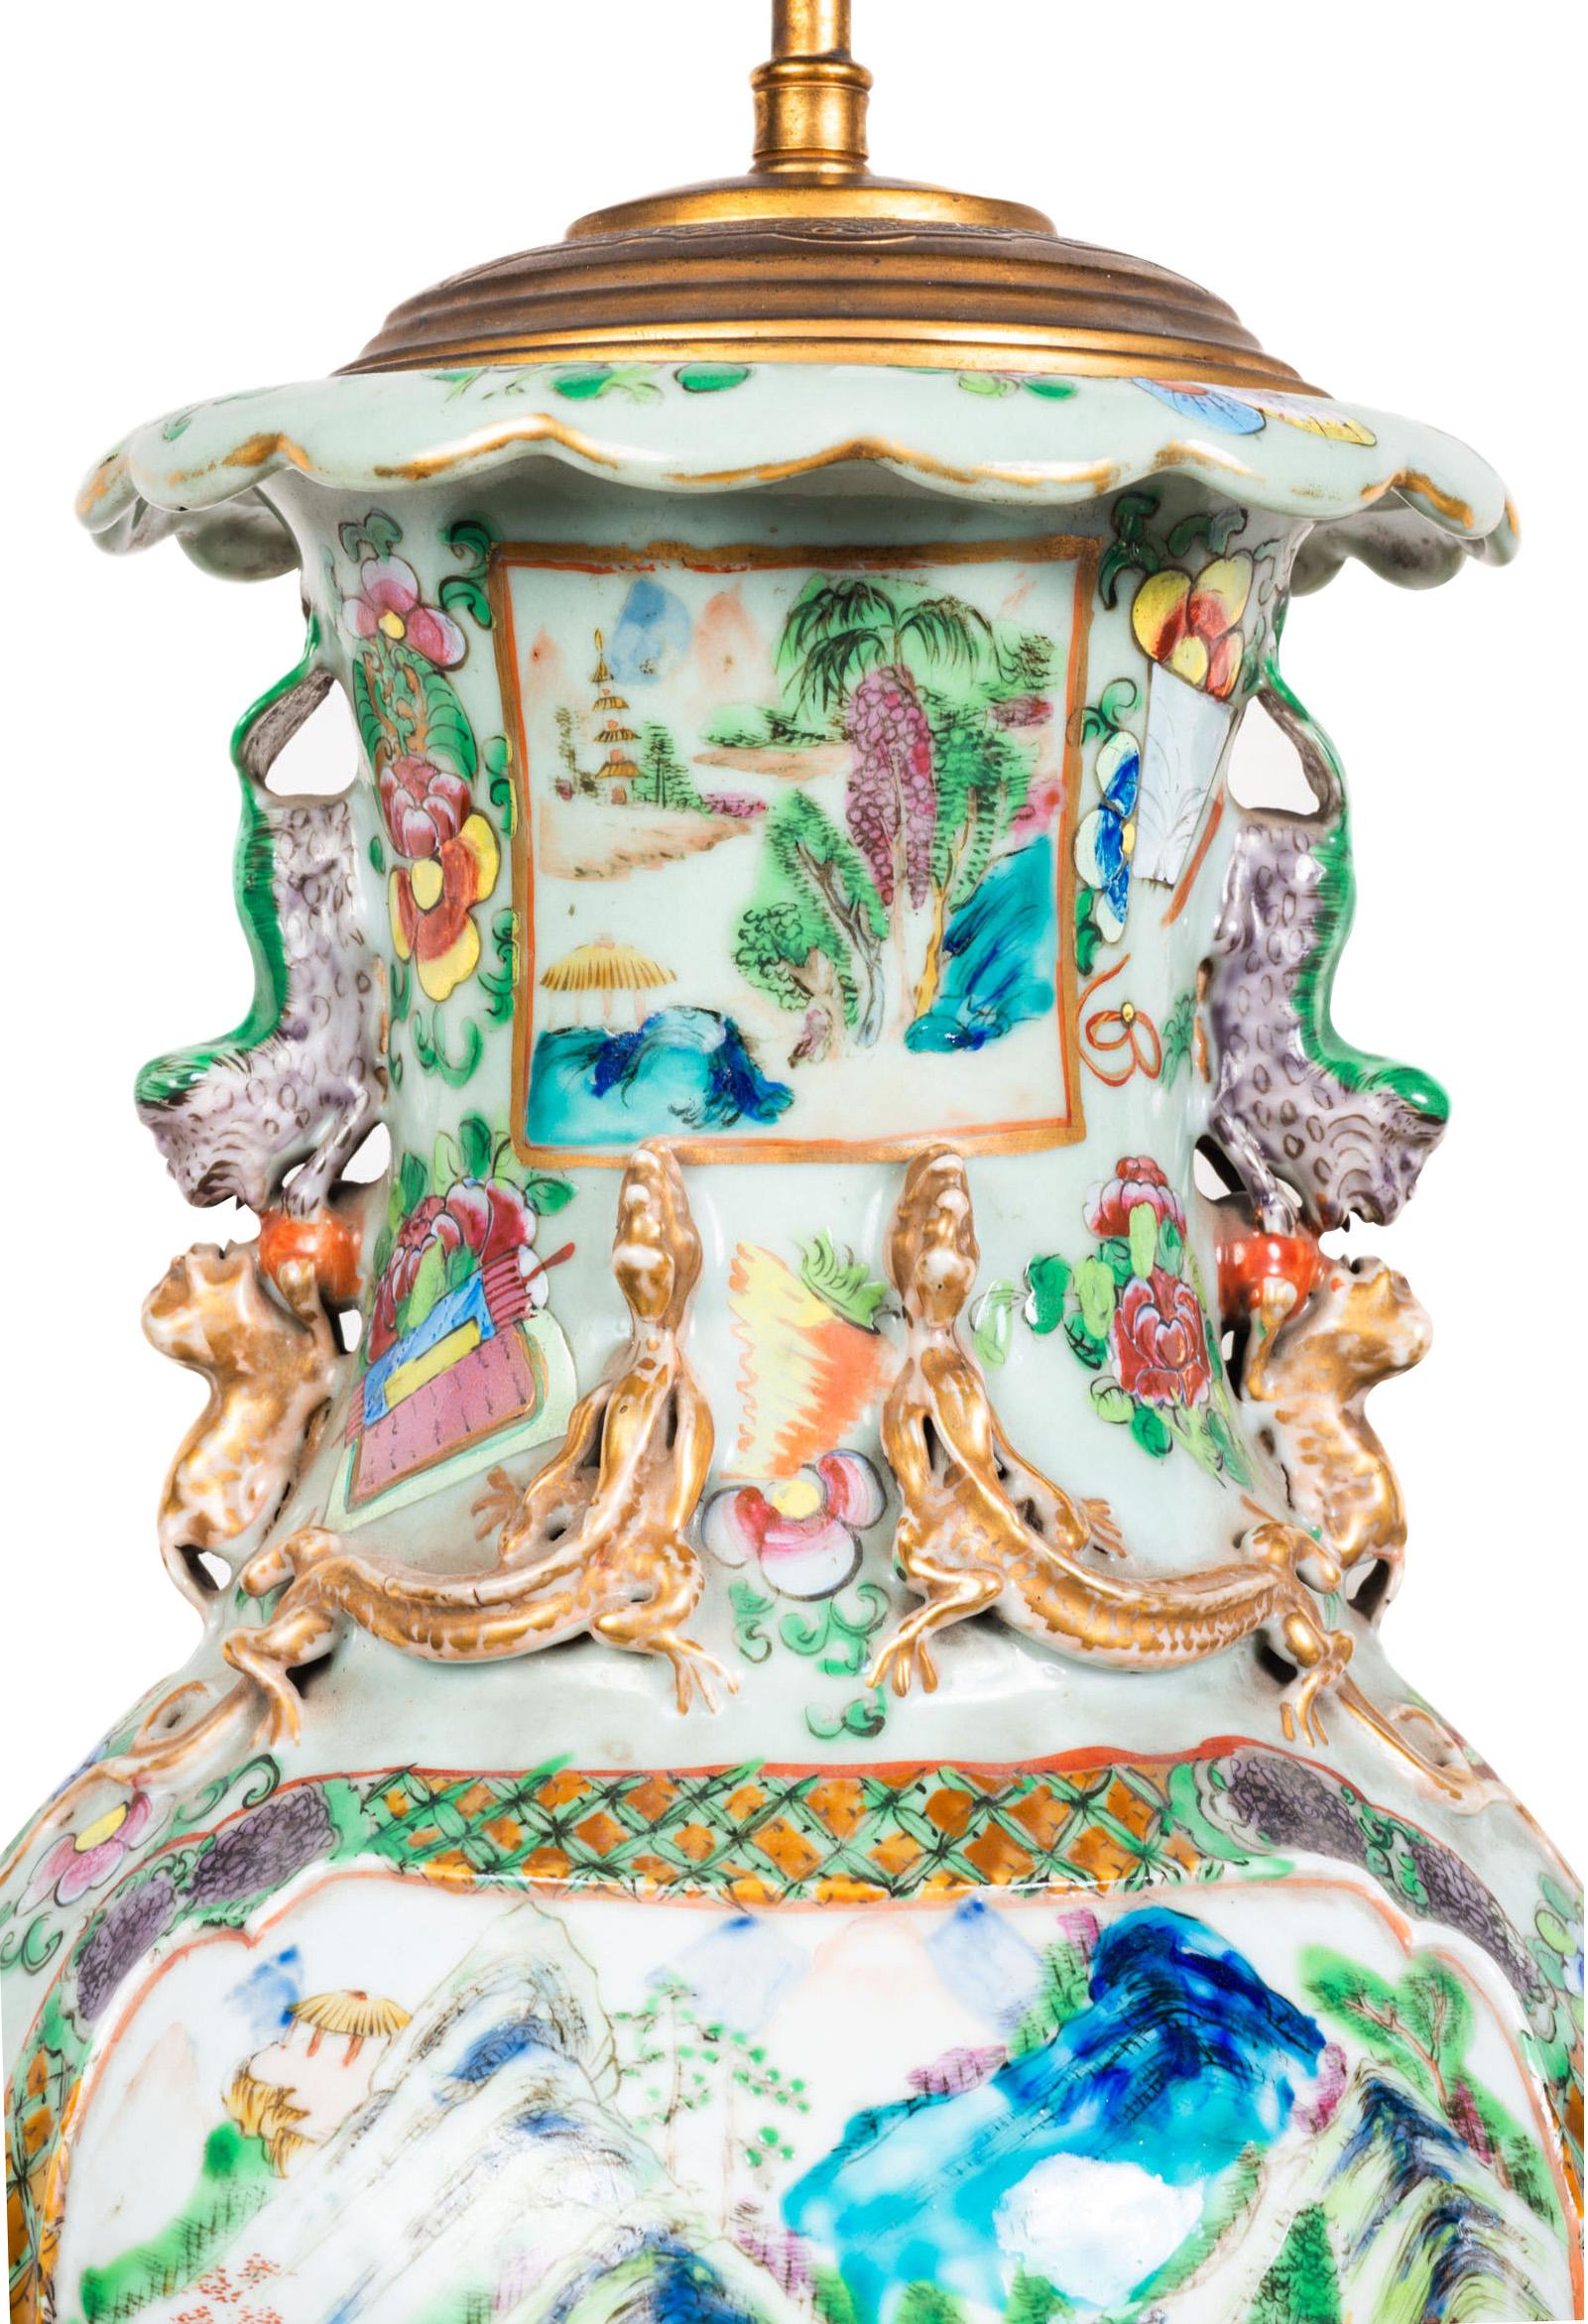 A wonderful quality pair of mid 19th century Chinese Cantonese / Rose medallion vases / lamps, each with bold colours, exotic flowers, butterflies and motifs. Inset painted panels depicting mountainous and lakeside scenes. Mounted on gilded ormolu